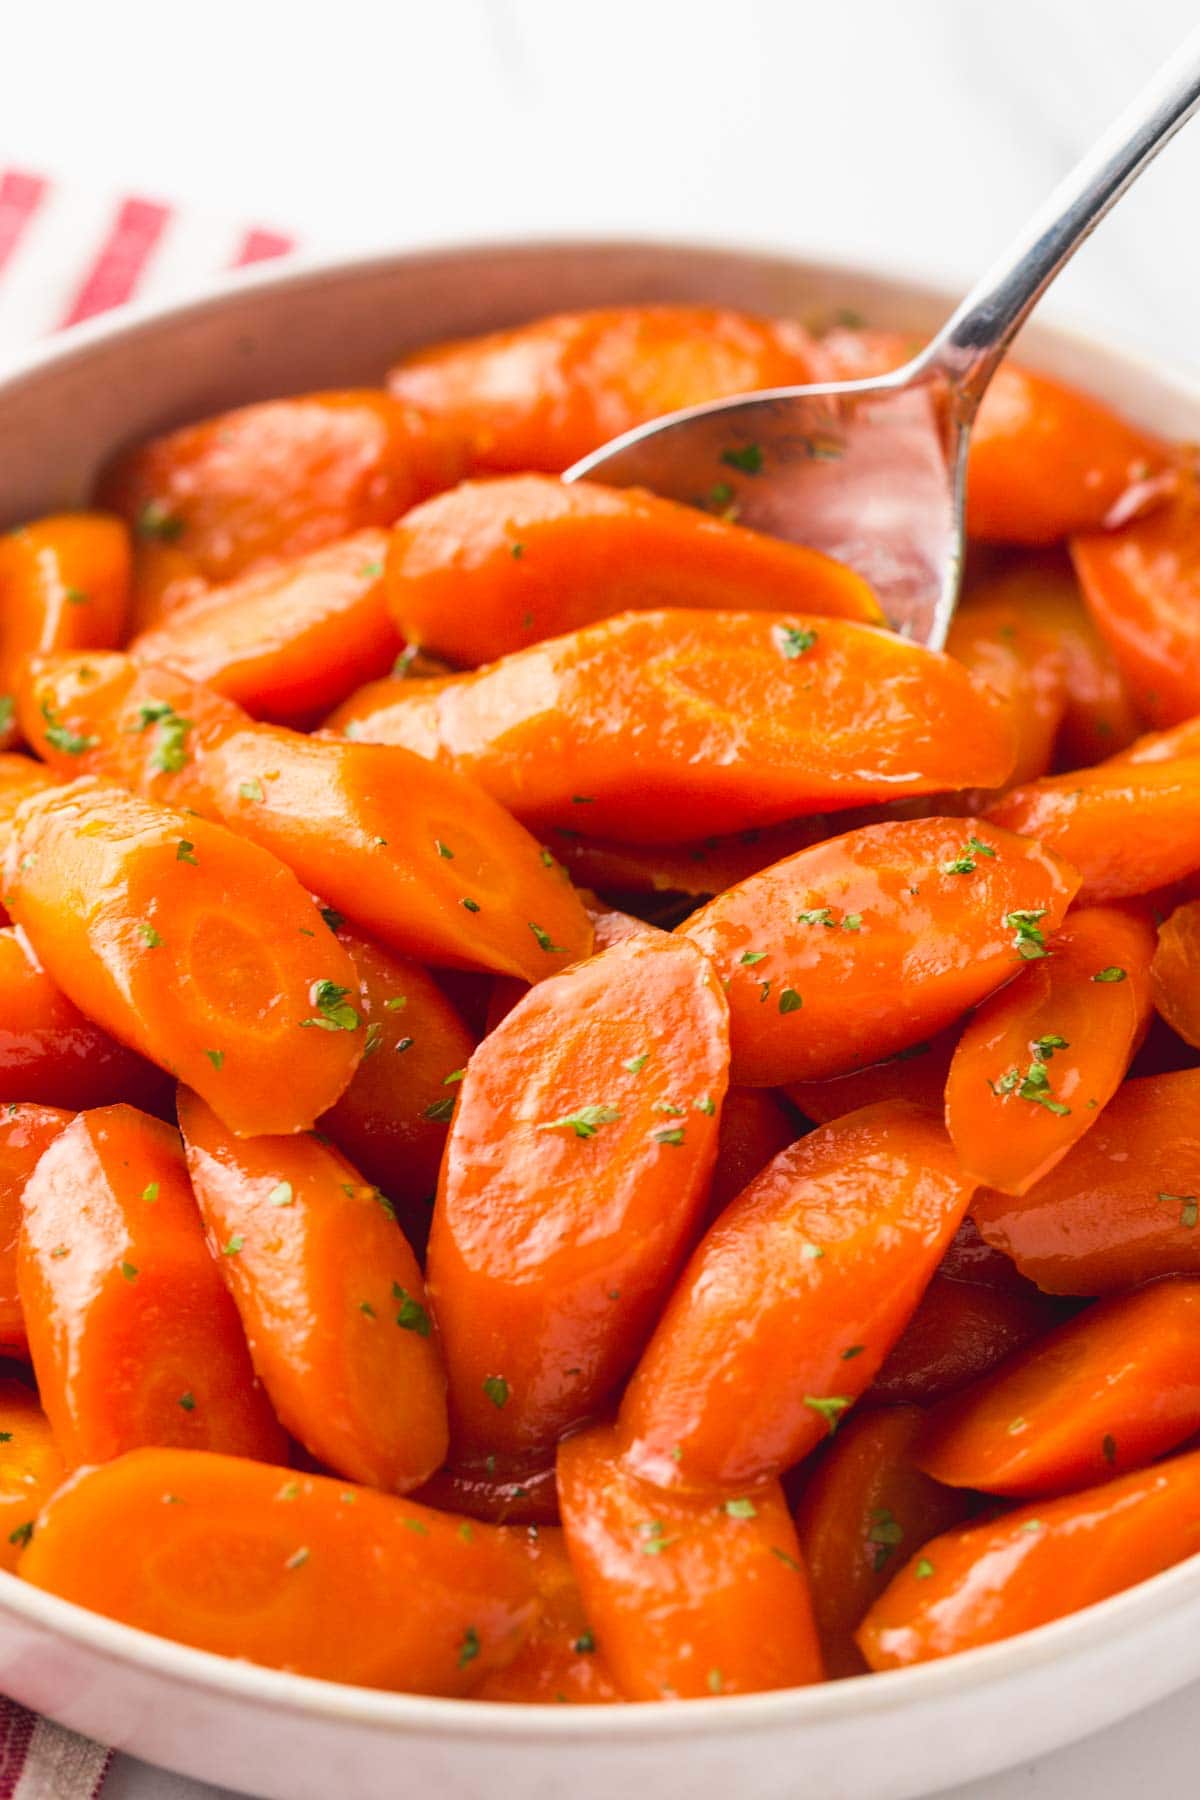 Glazed carrots in a large white bowl with a serving spoon